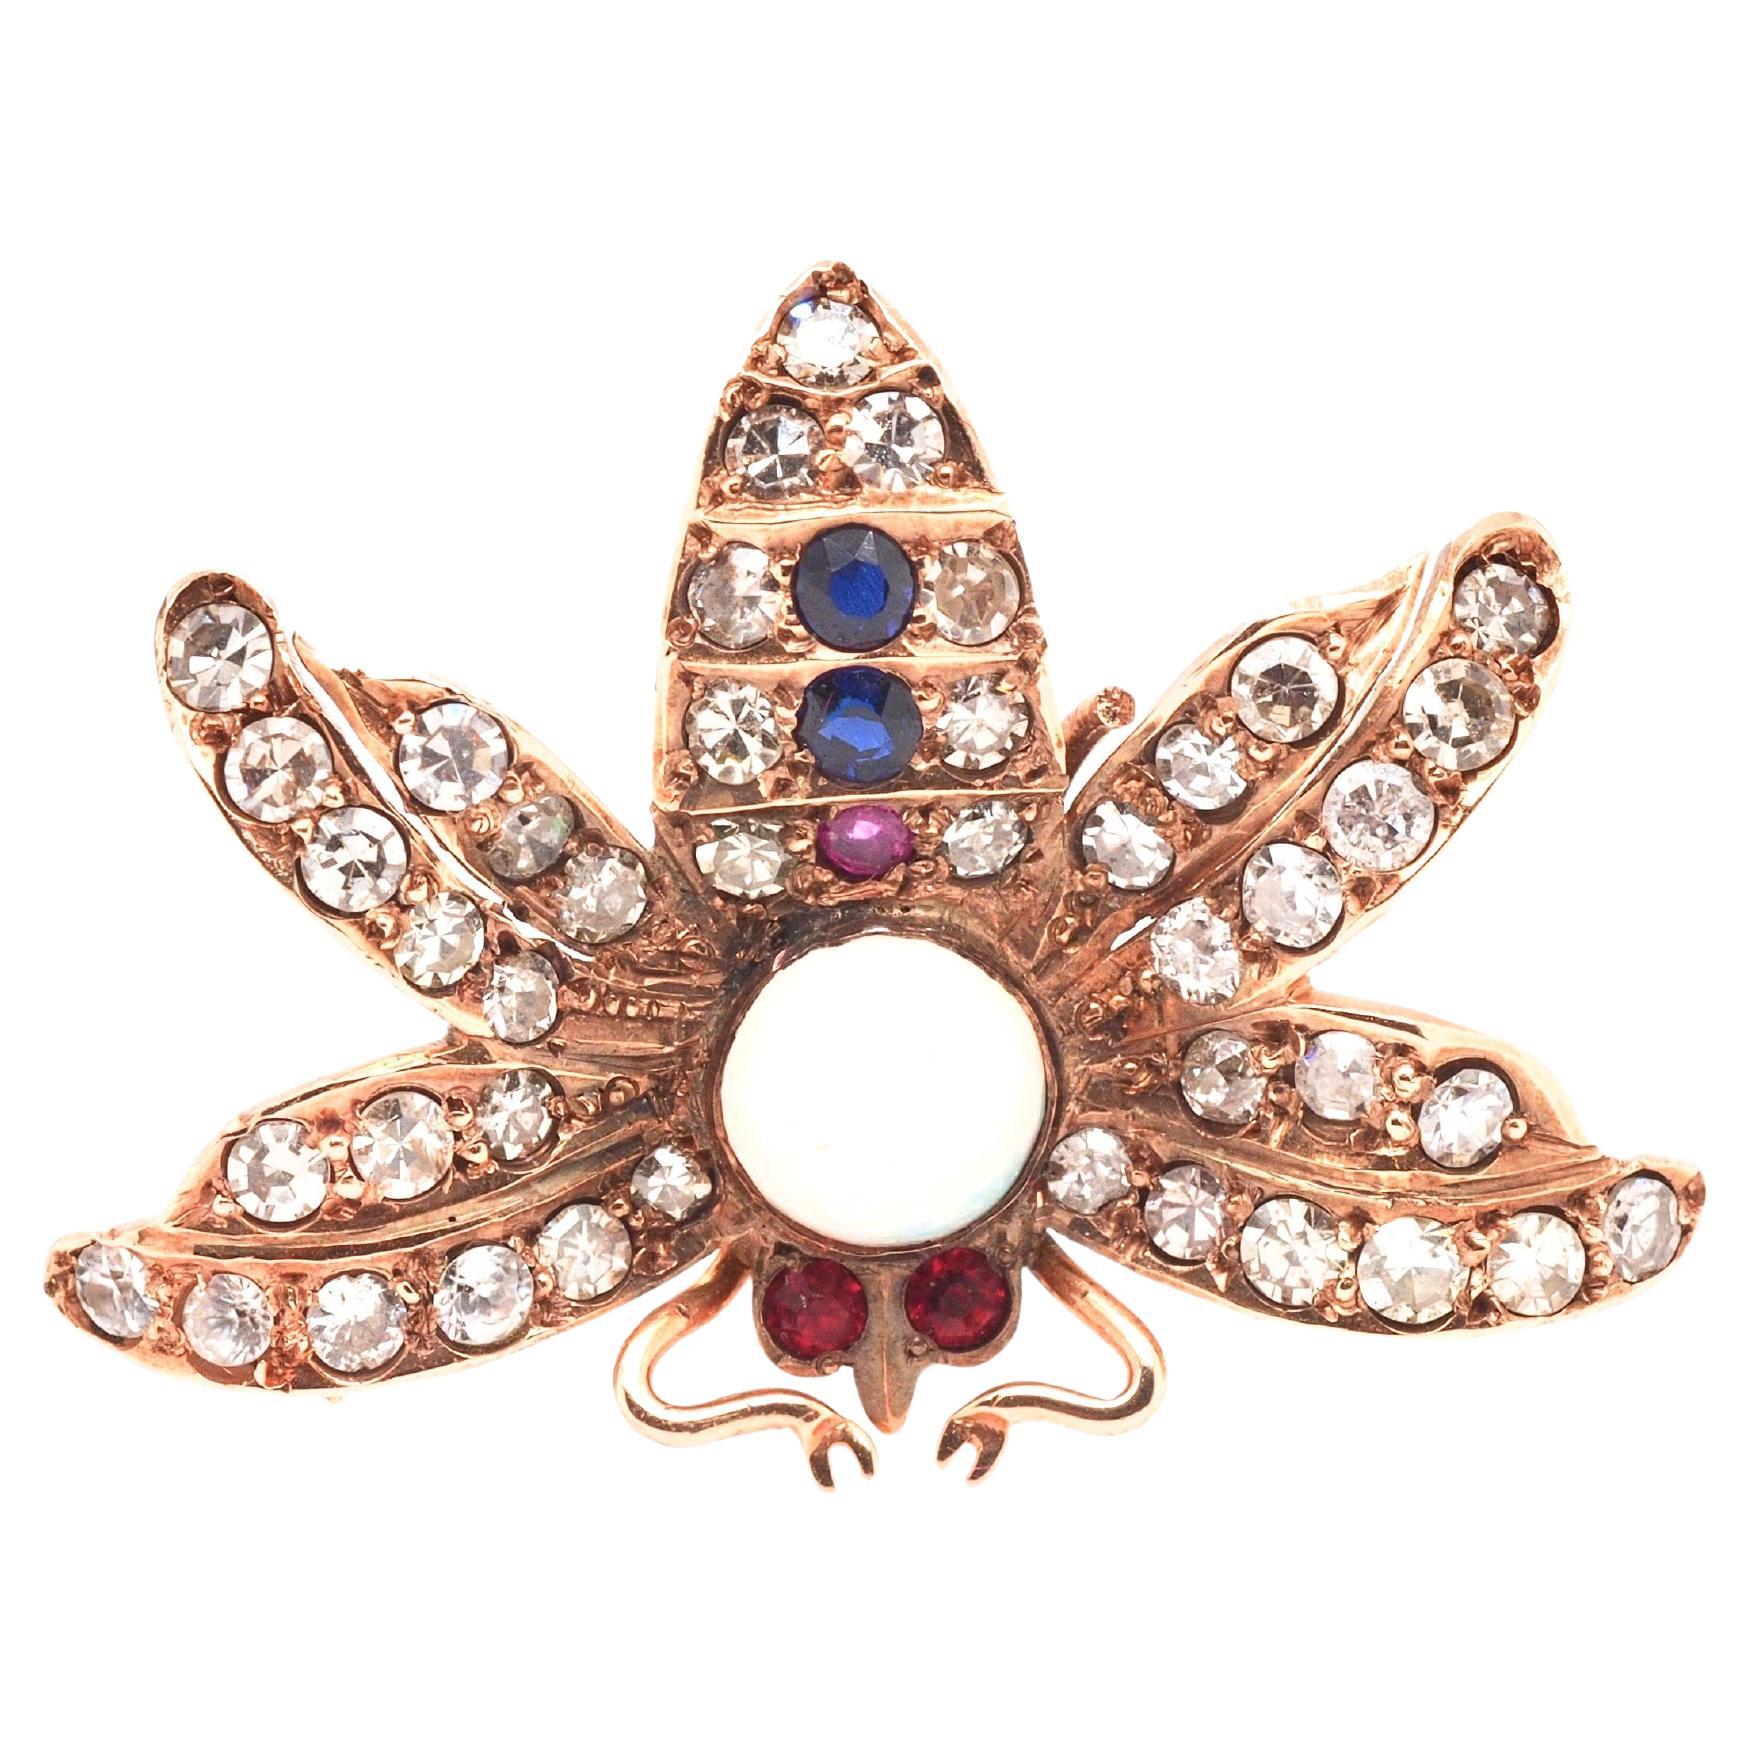 Circa 1900s 14K Yellow Gold Opal, Diamond, Sapphire and Ruby Butterfly Brooch For Sale